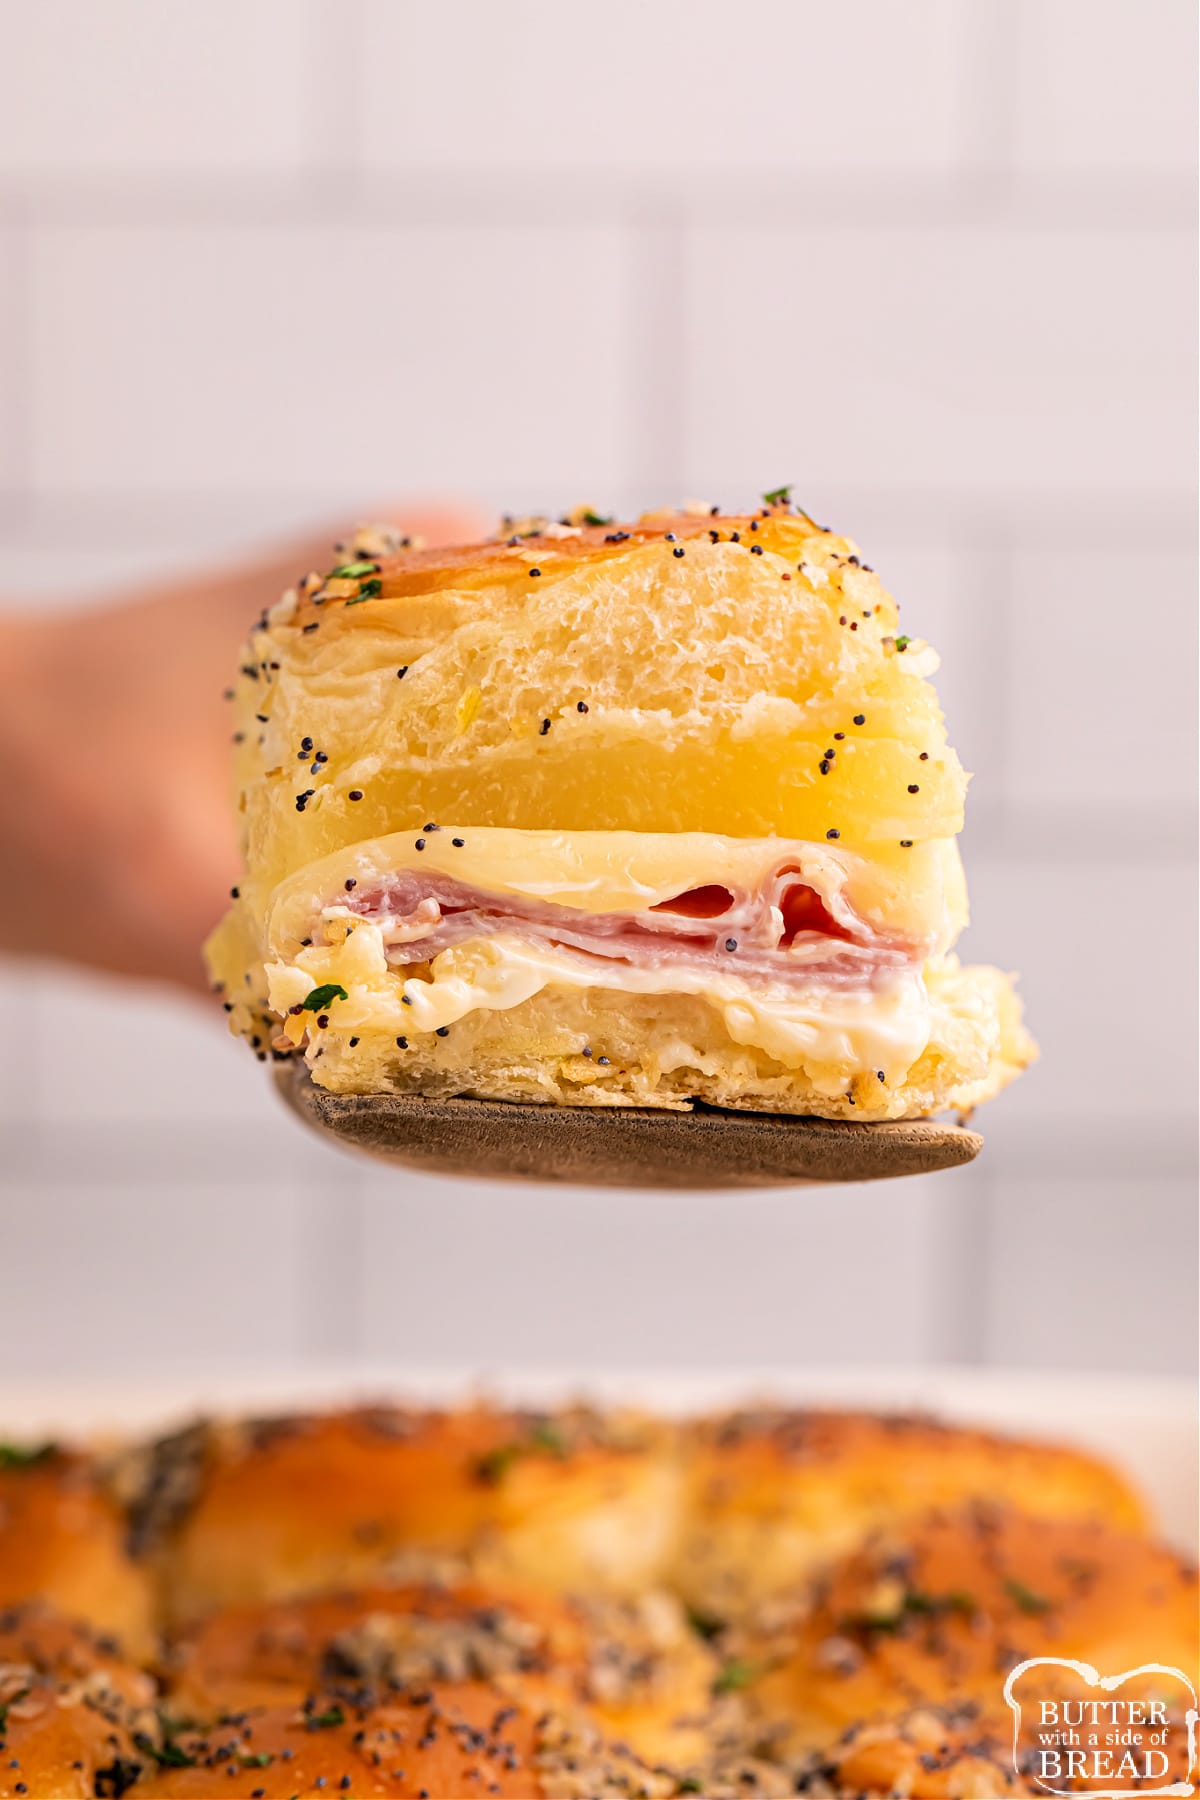 Pineapple Ham Sliders made with Hawaiian rolls, ham, cheese, and pineapple. A simple weeknight dinner that only takes a few minutes to prep!